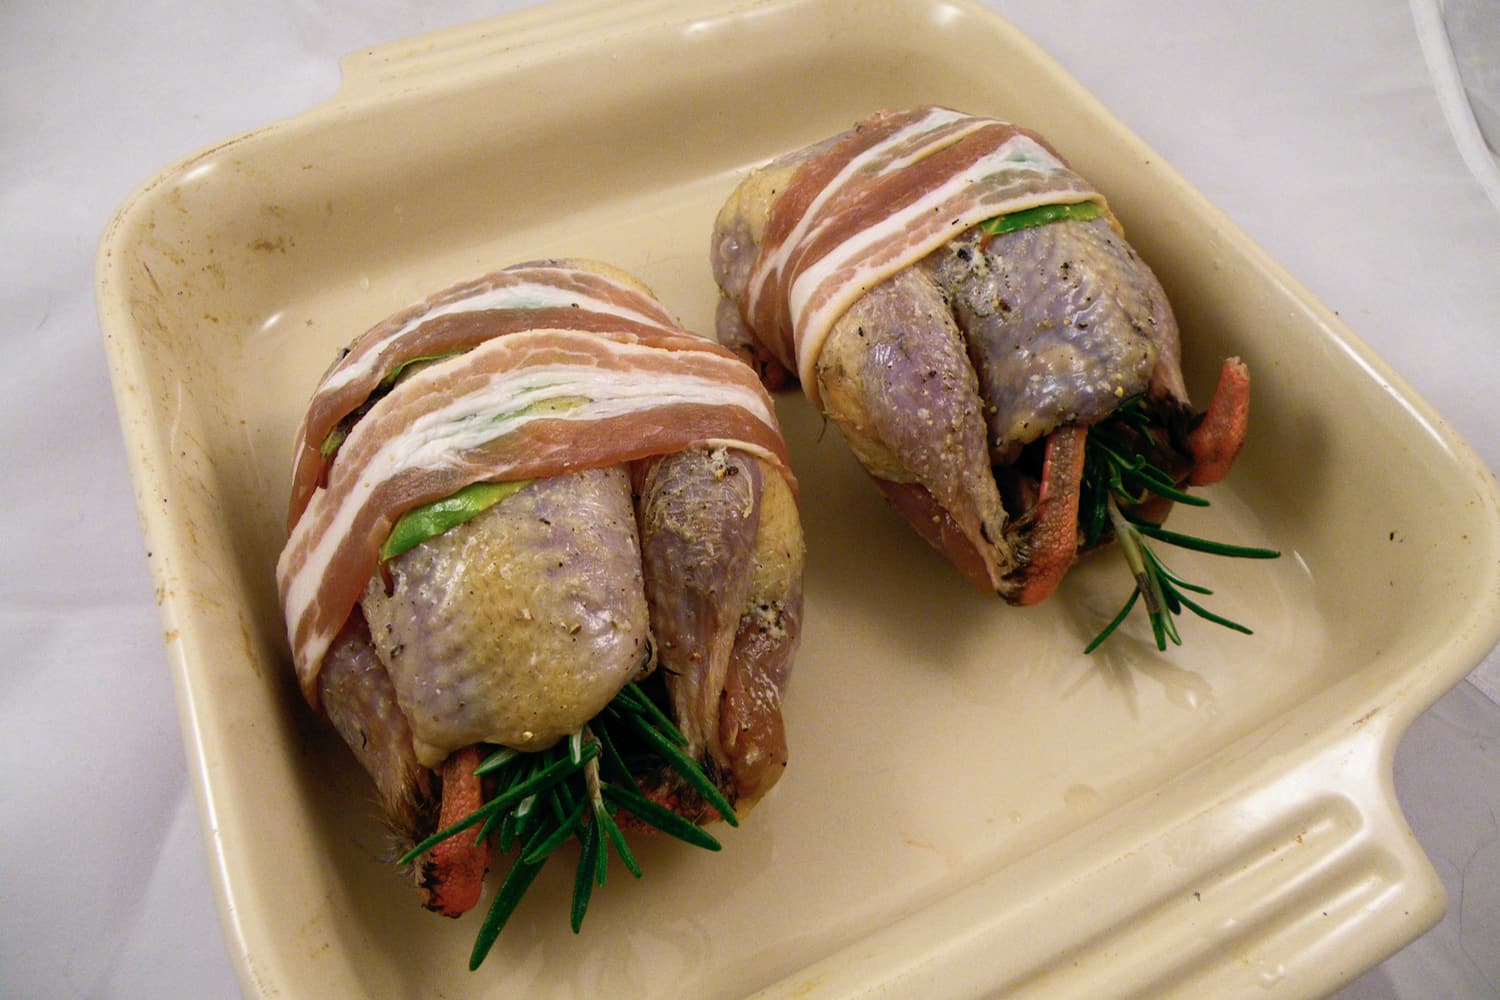 Partridge prepared to be roasted